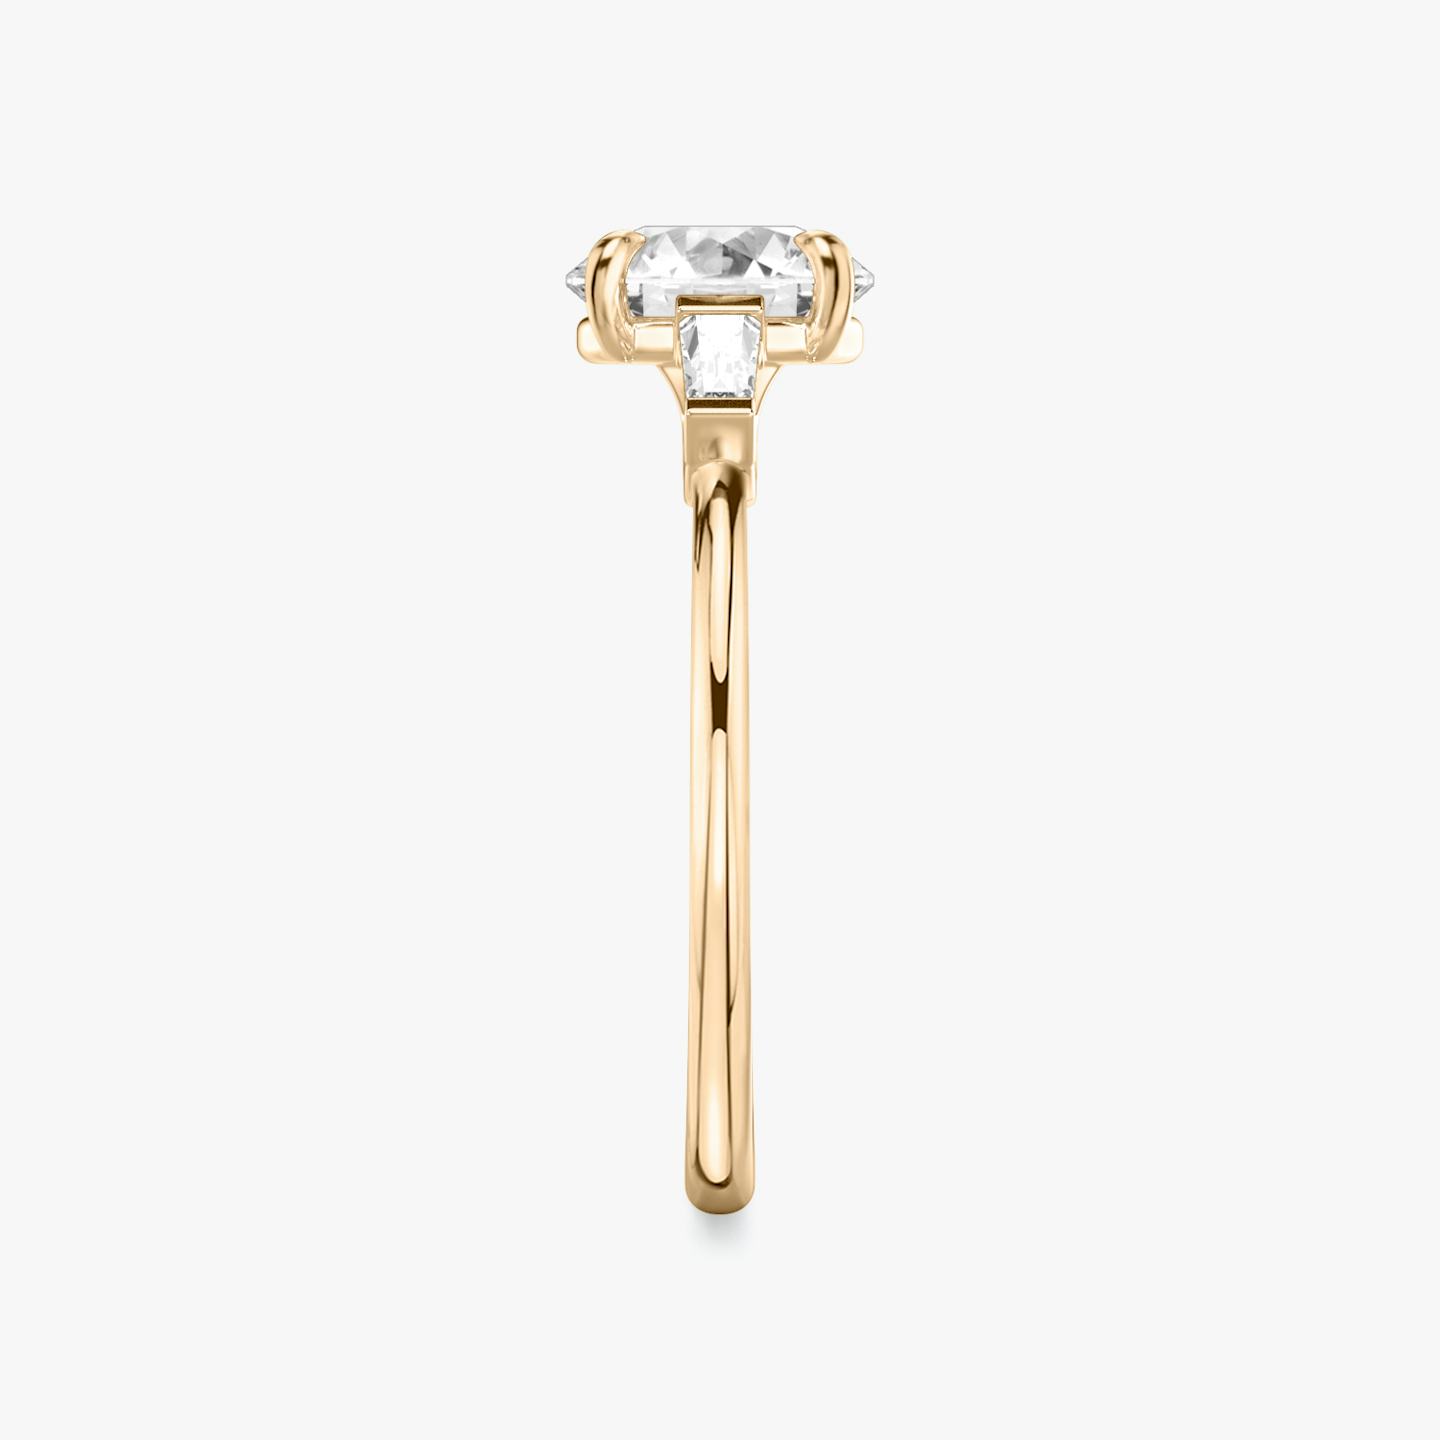 The Three Stone | Round Brilliant | 14k | 14k Rose Gold | Band: Plain | Carat weight: 1 | Side stone carat: 1/10 | Side stone shape: Tapered Baguette | Diamond orientation: vertical